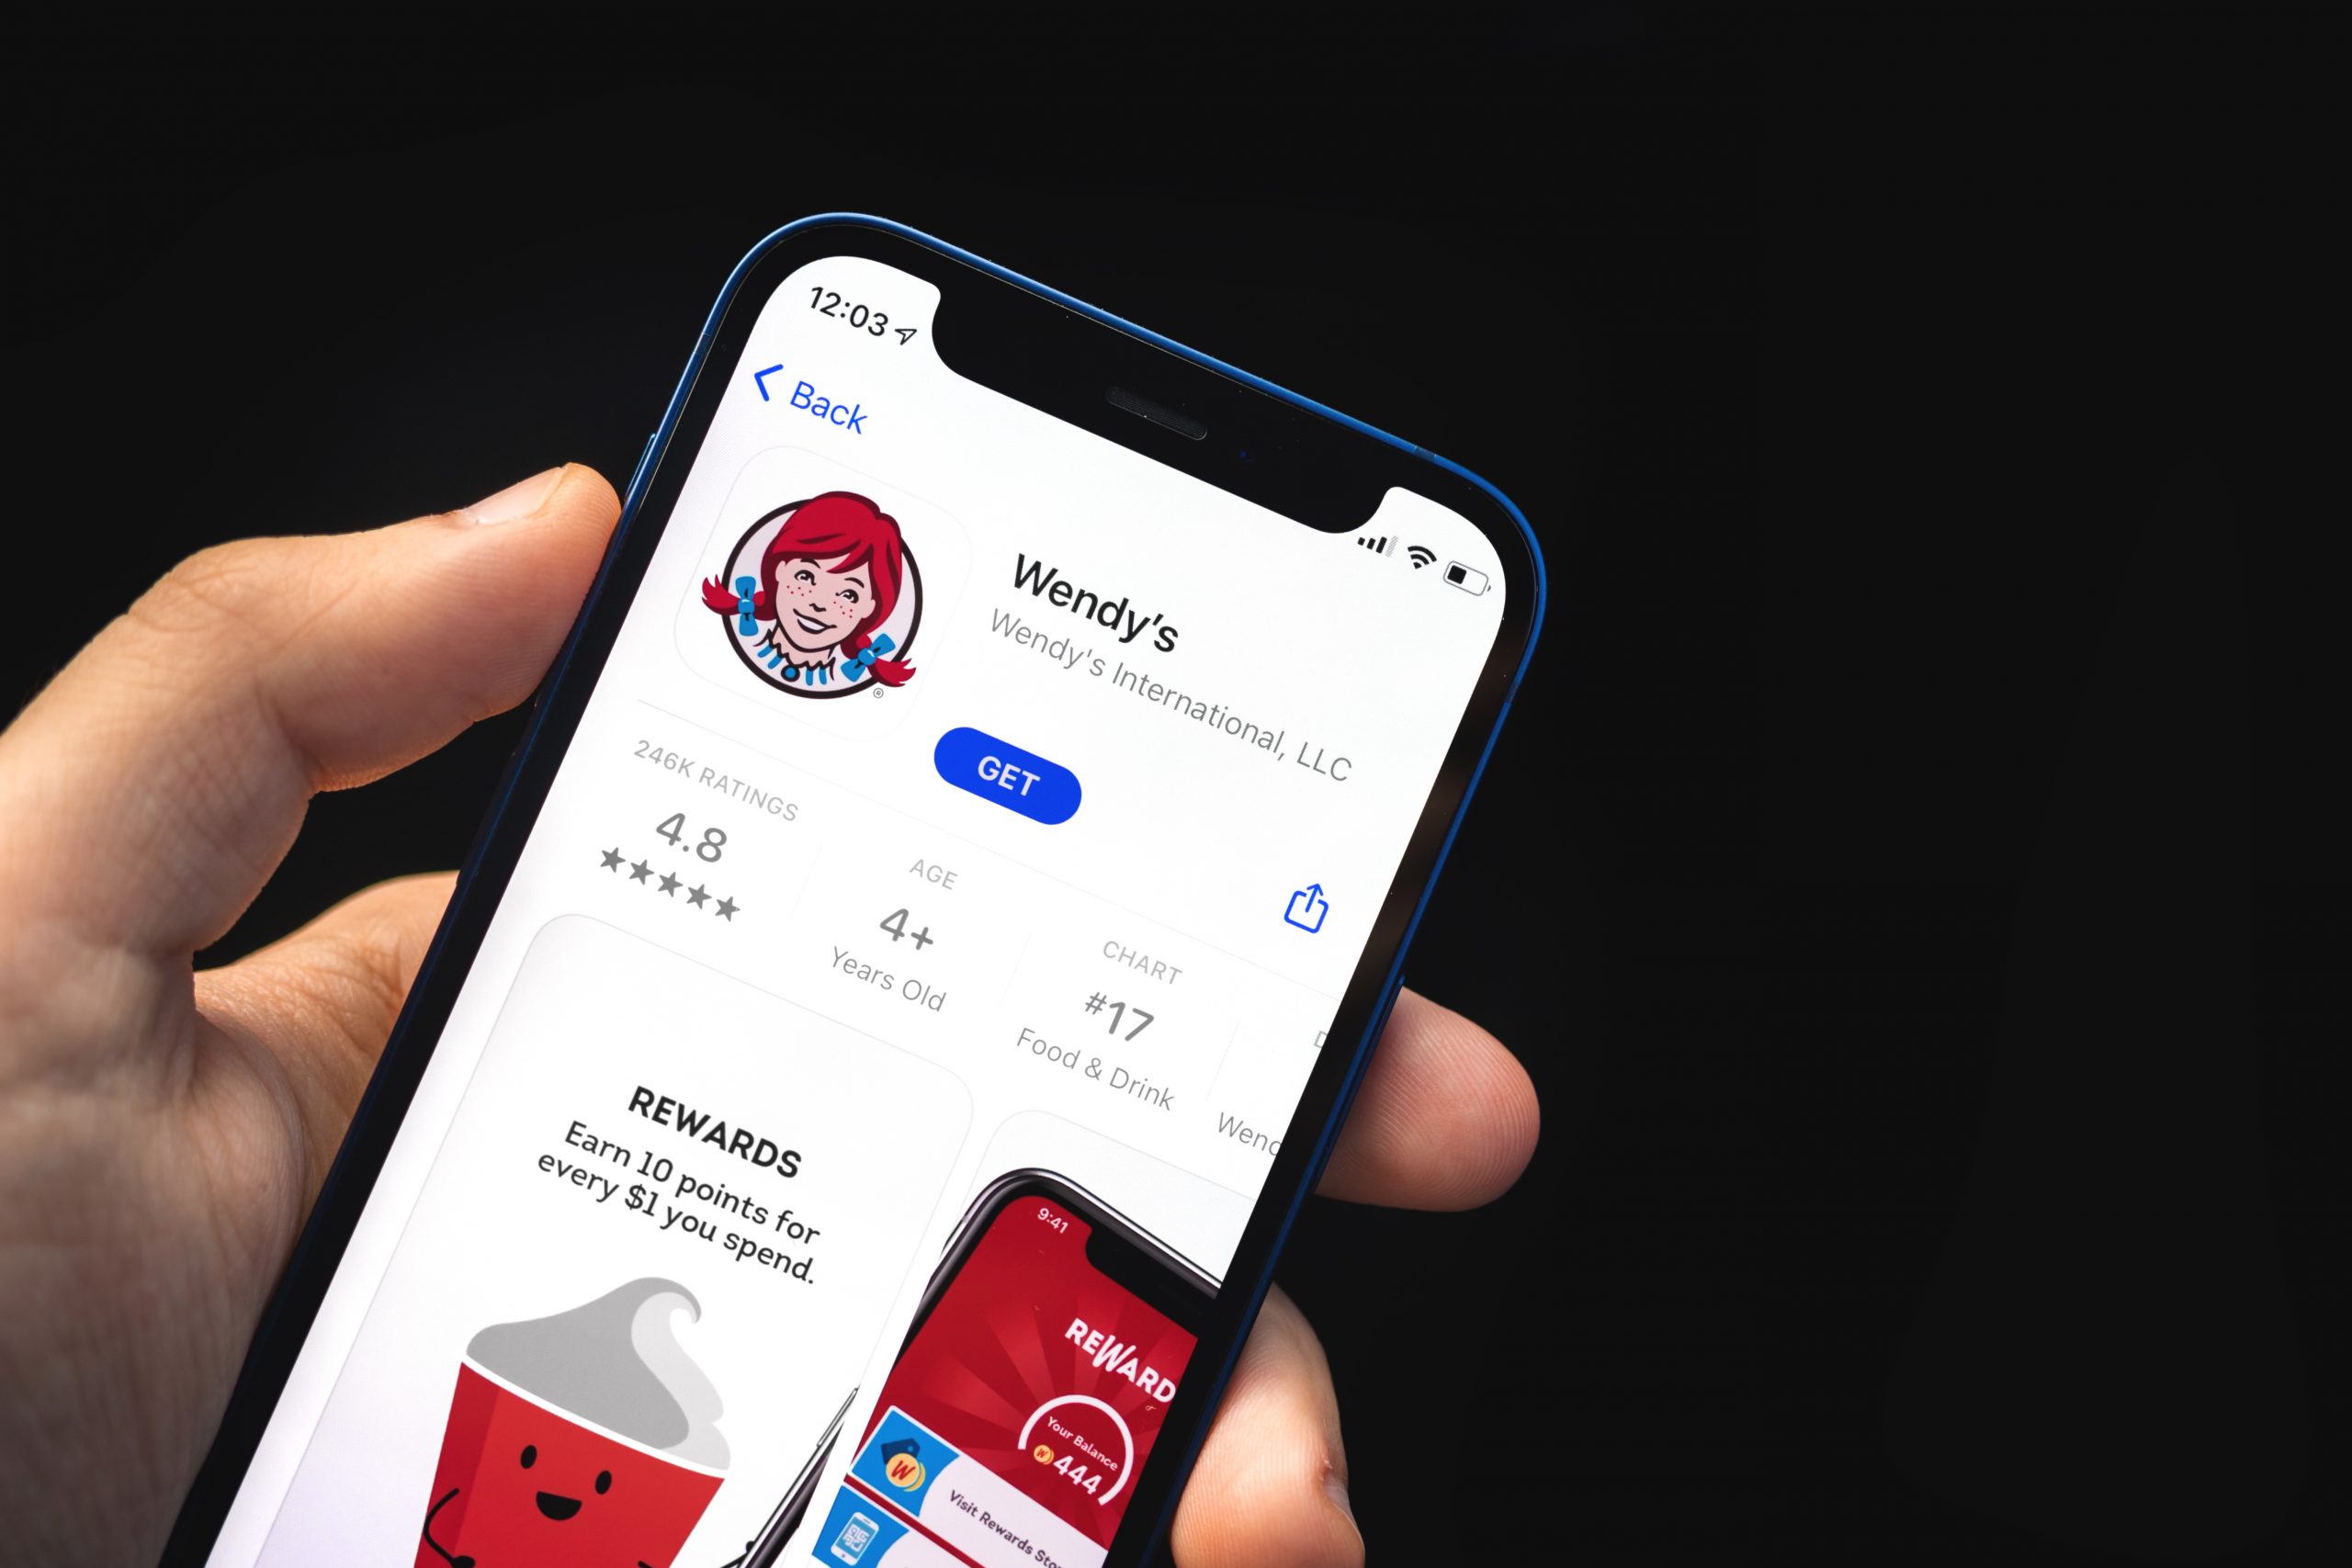 Hand holds phone showing Wendy's app